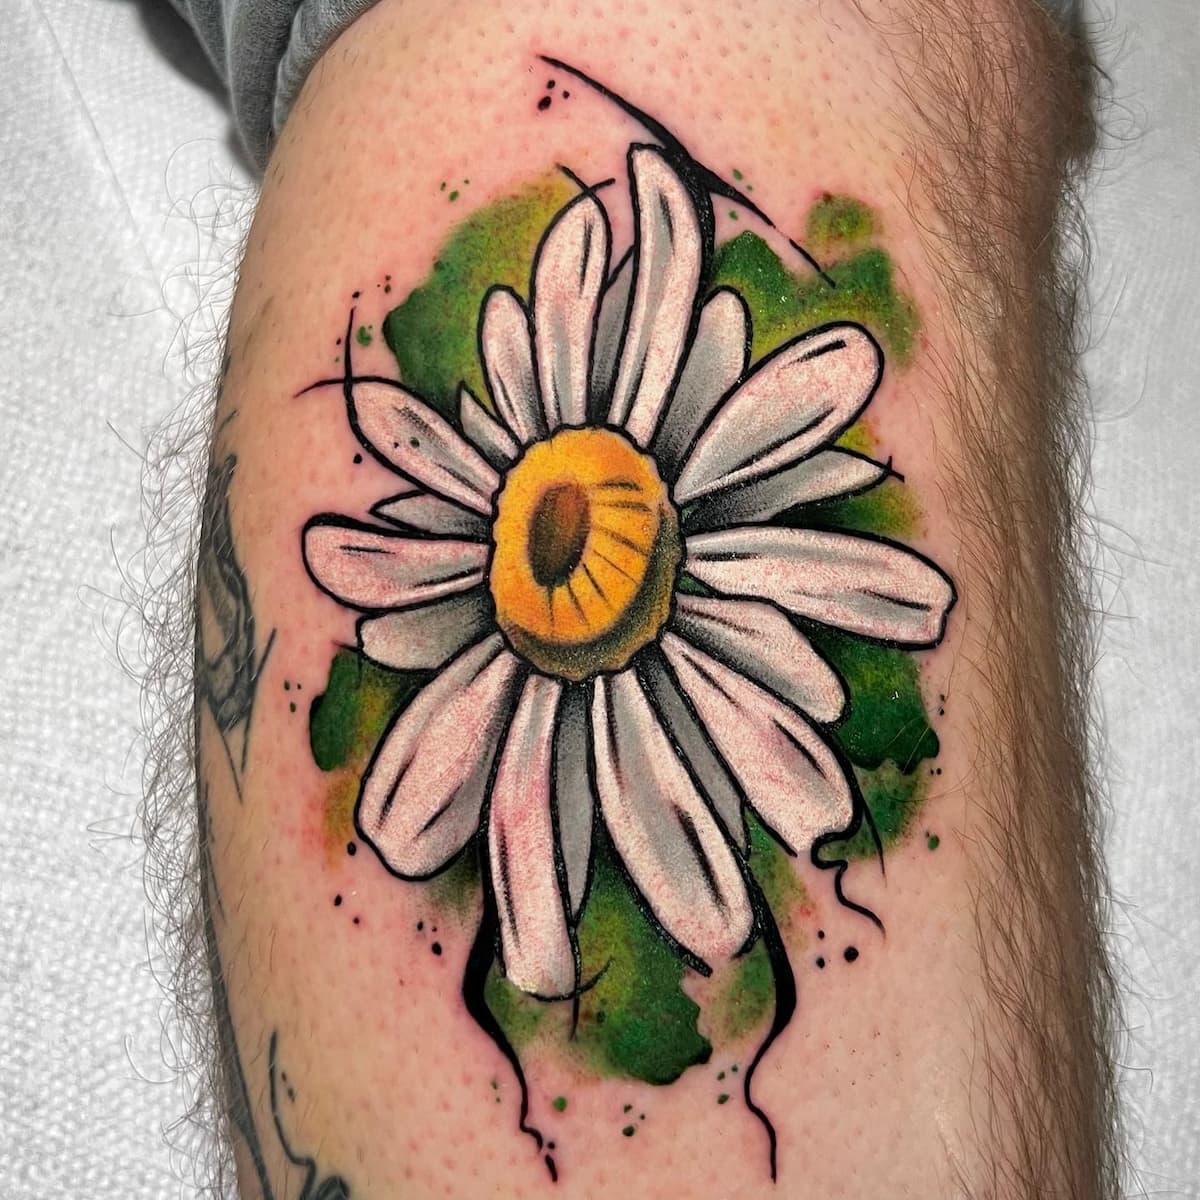 Heres What A Daisy Tattoo Really Means